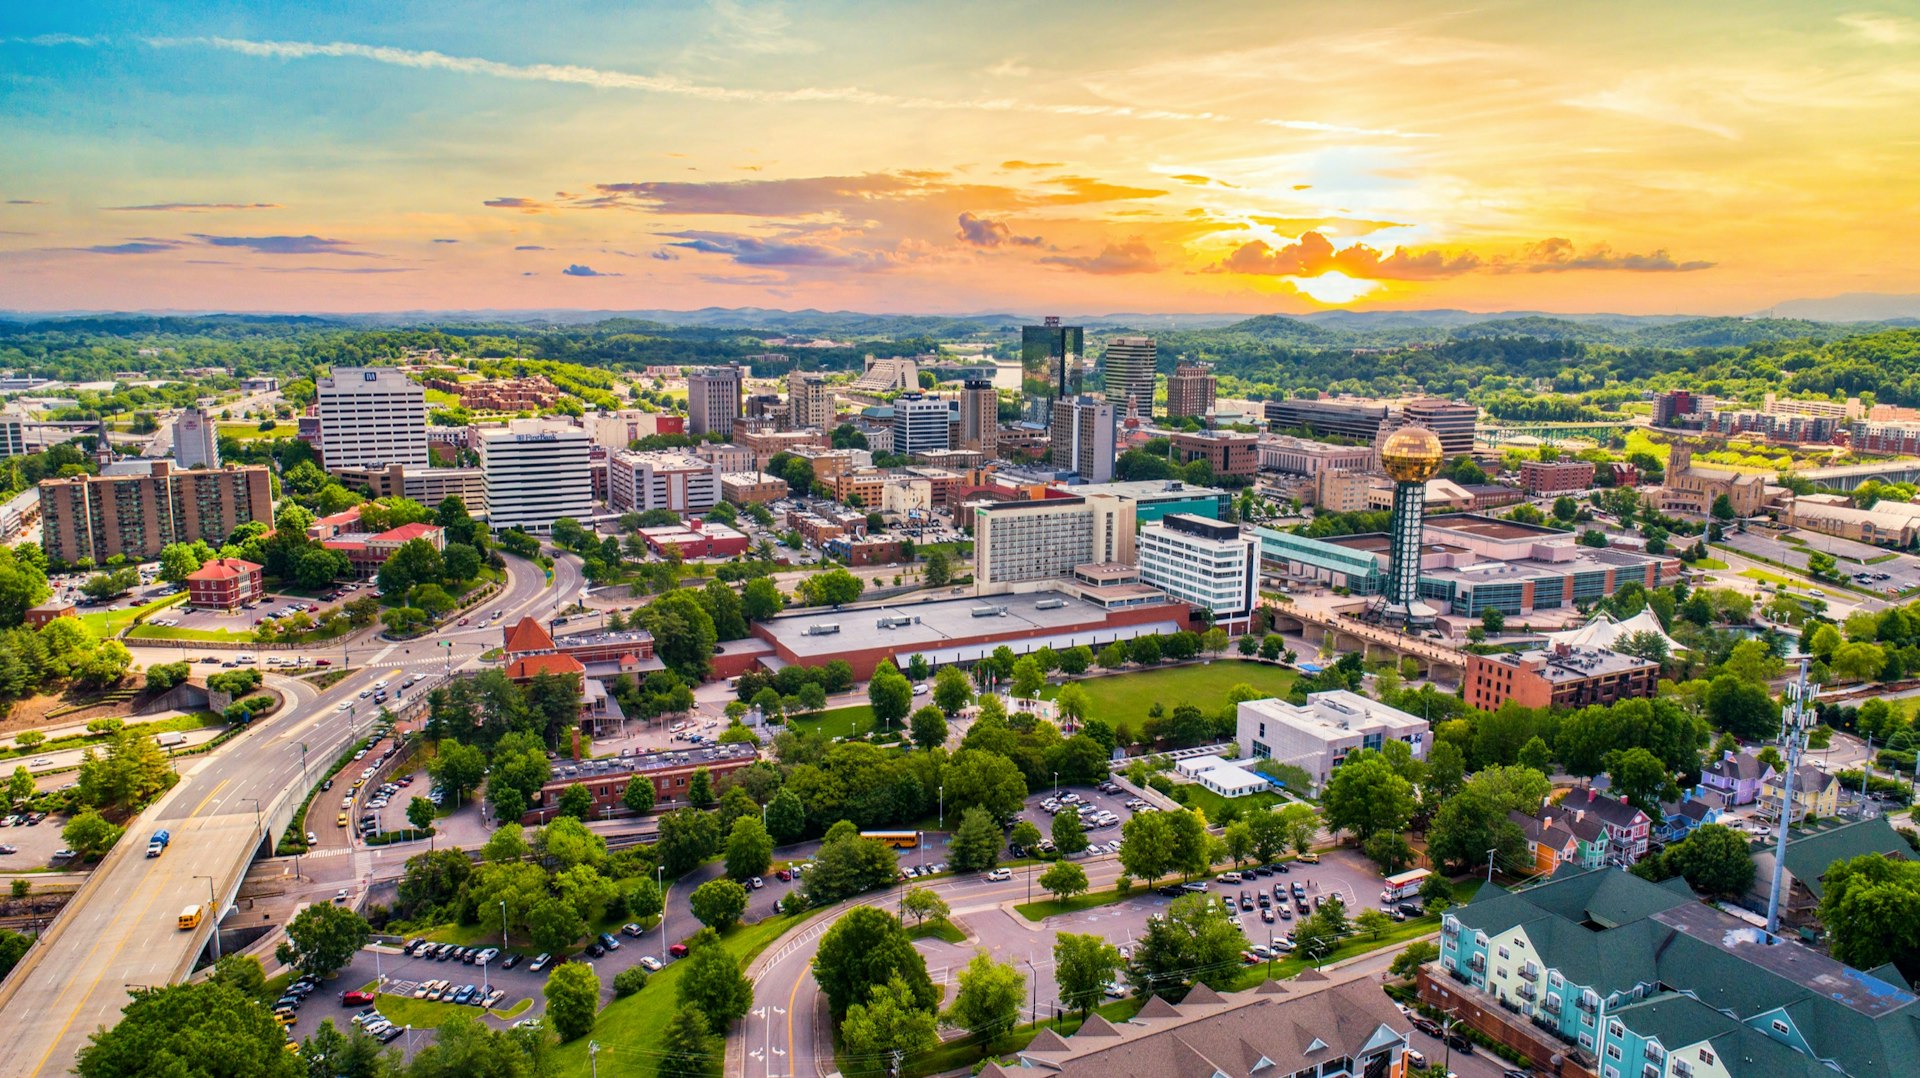 Knoxville_Responsible_City_View.jpg